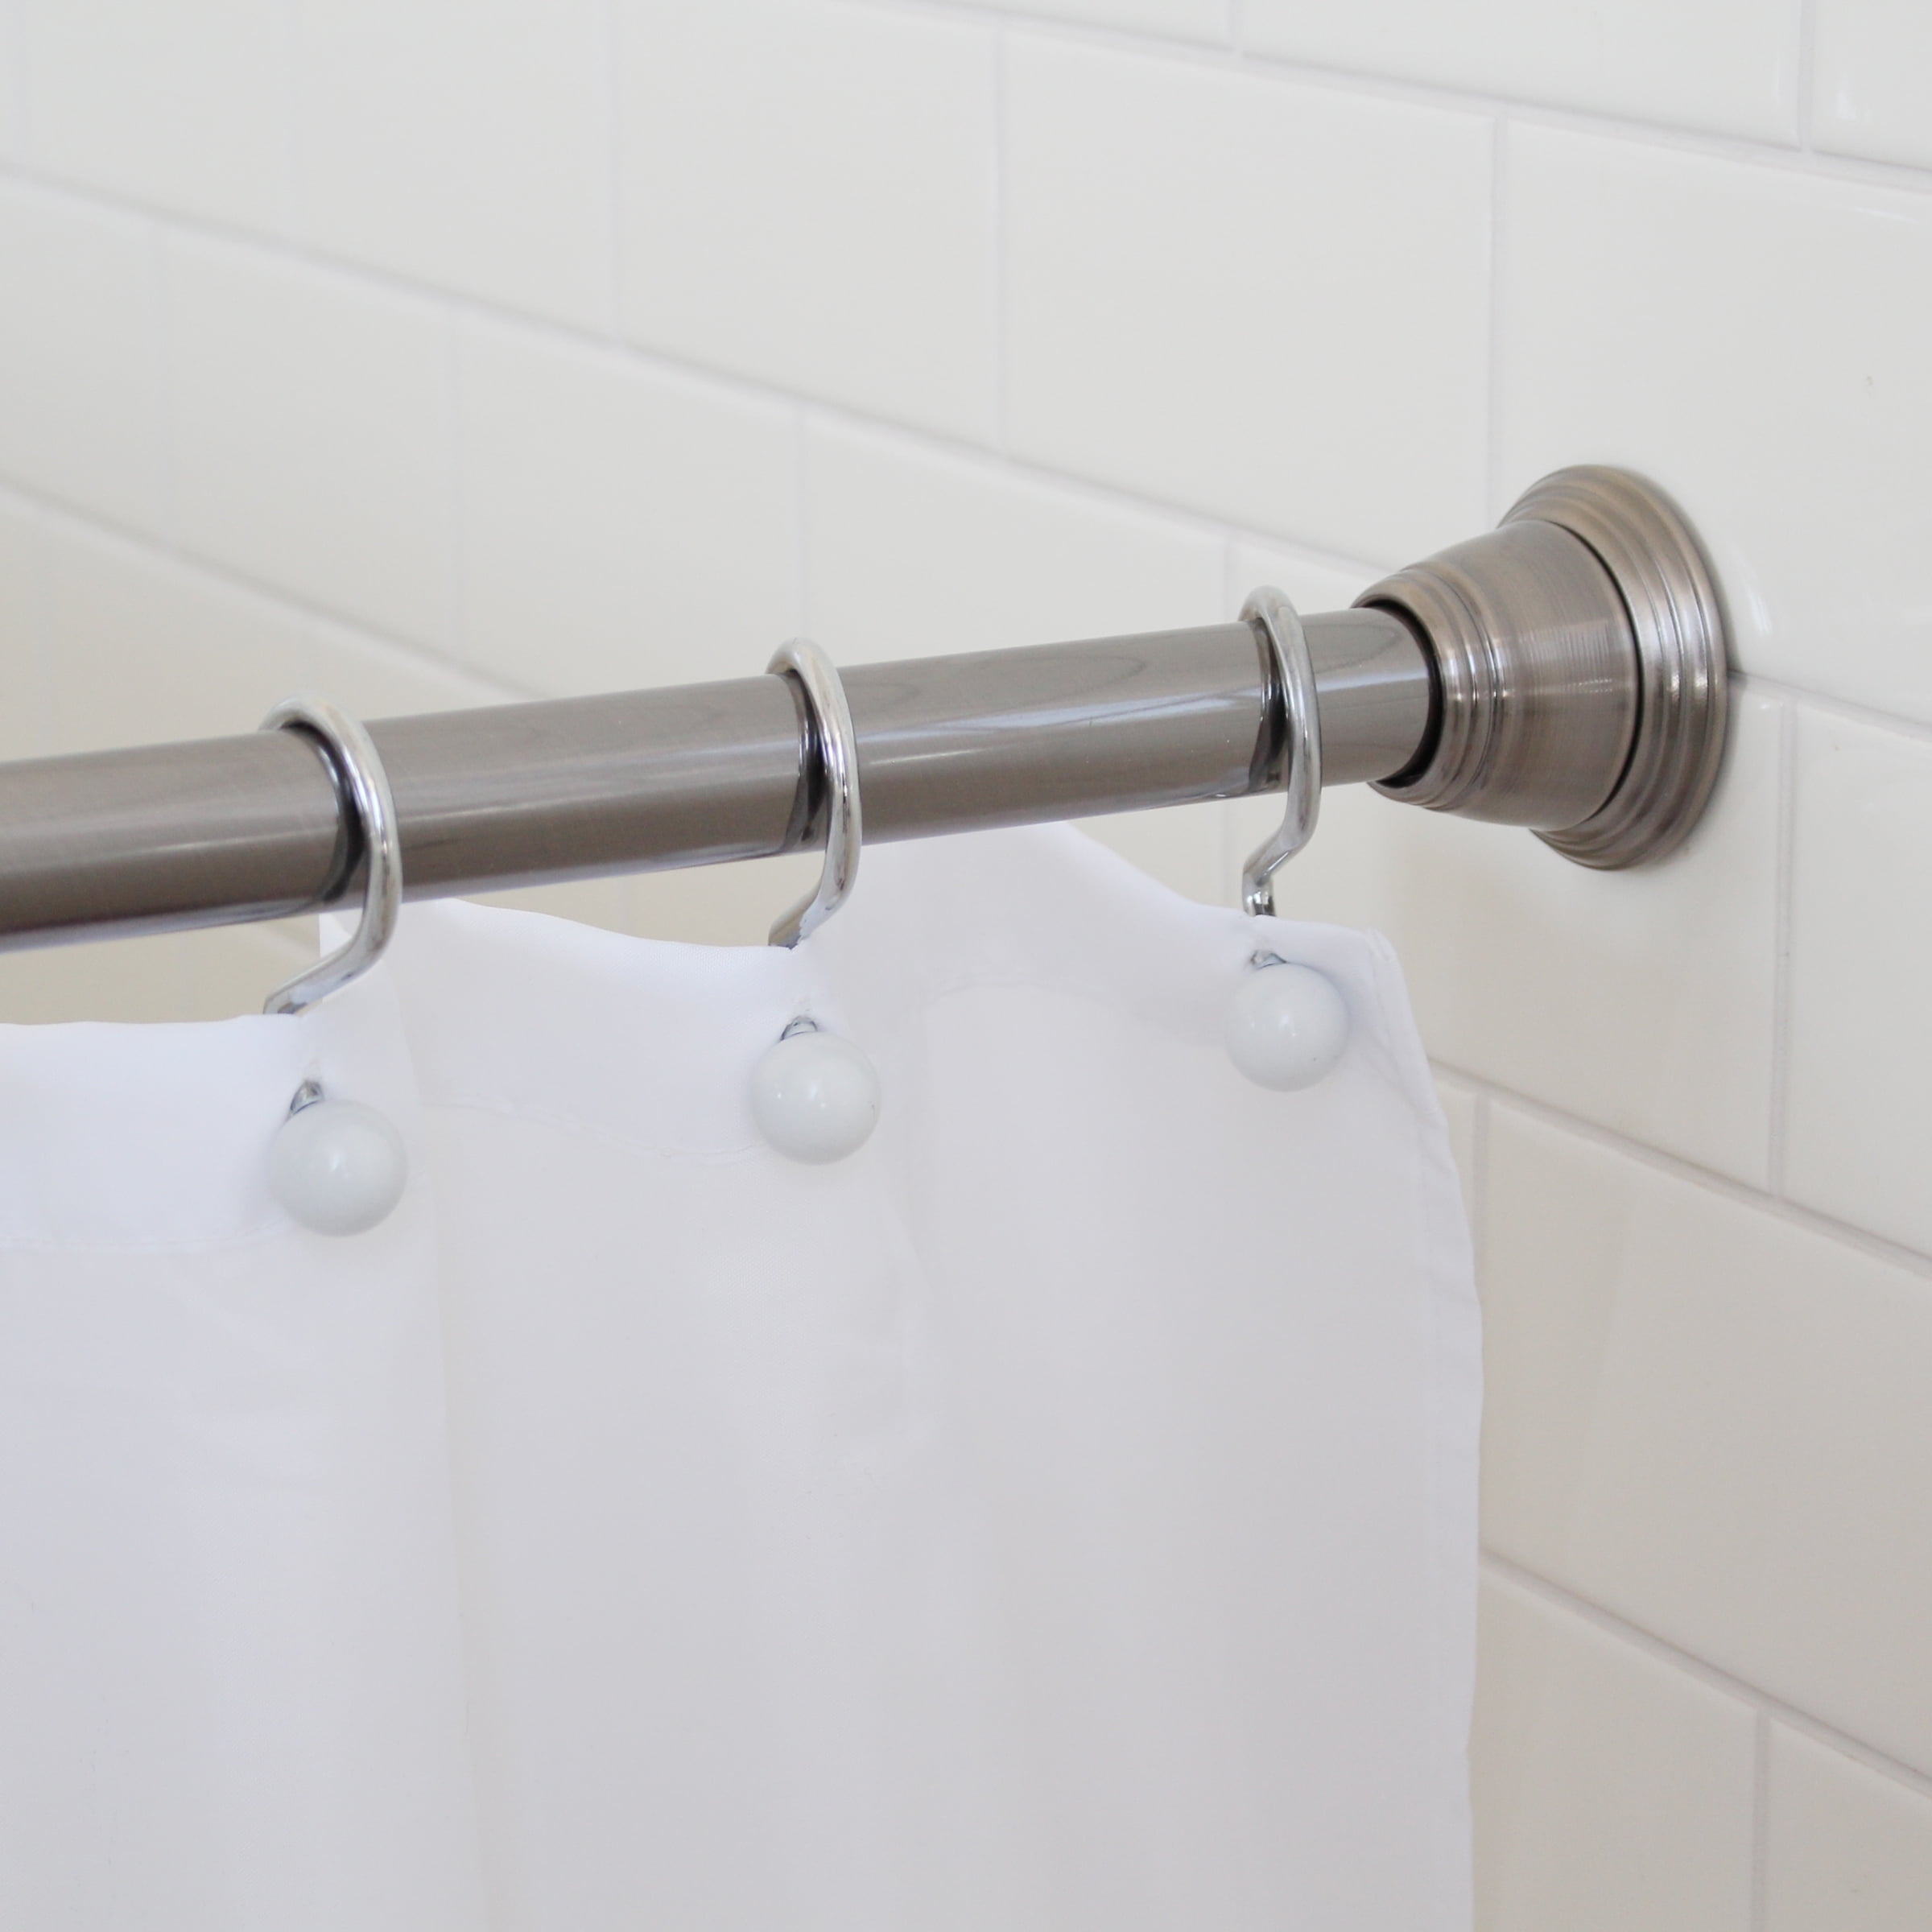 Splash Home Eire Rust Resistant Strong, How To Install A Shower Curtain Tension Rod